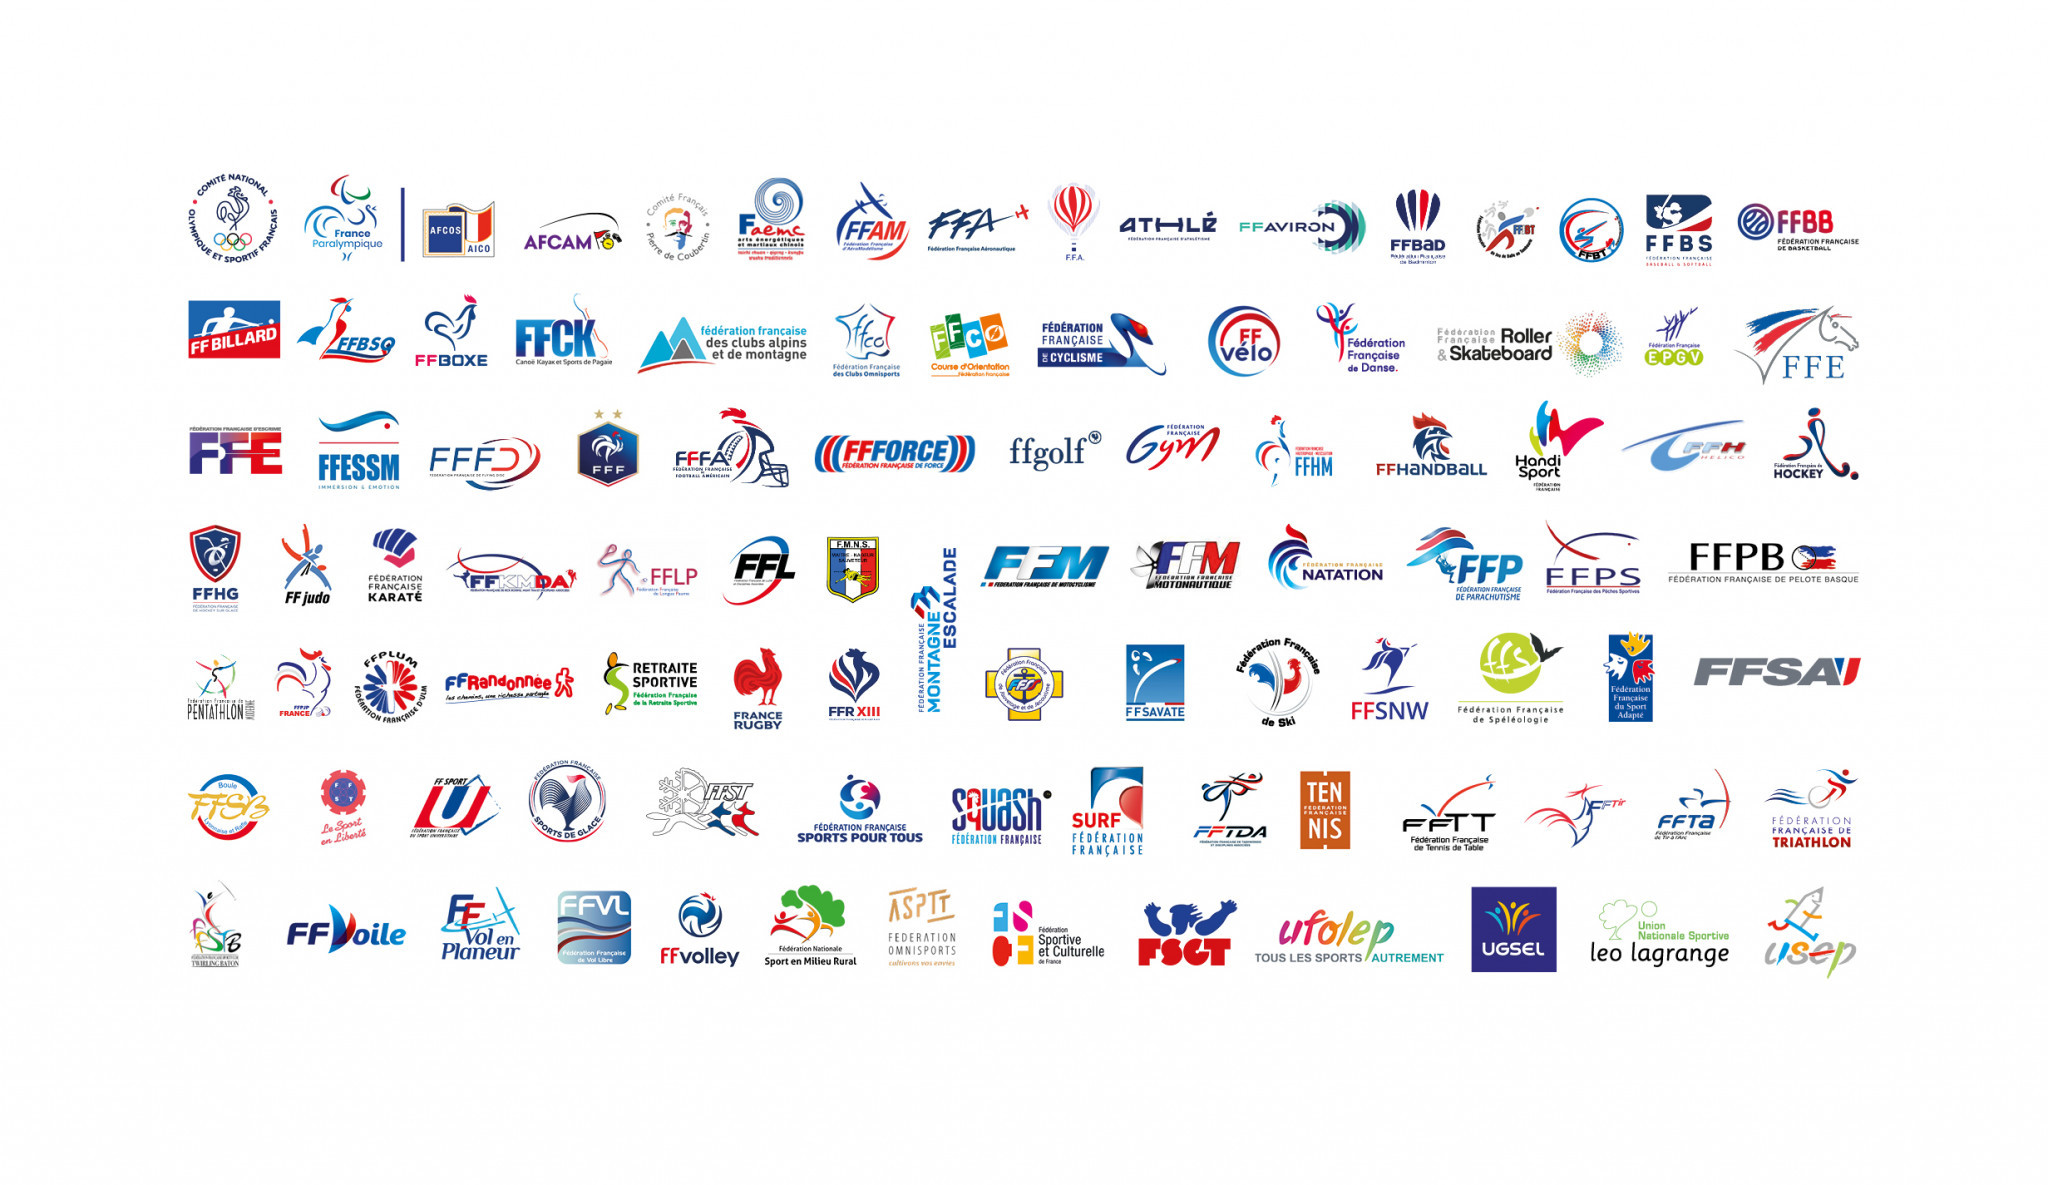 Almost 100 organisations signed the letter ©CNOSF